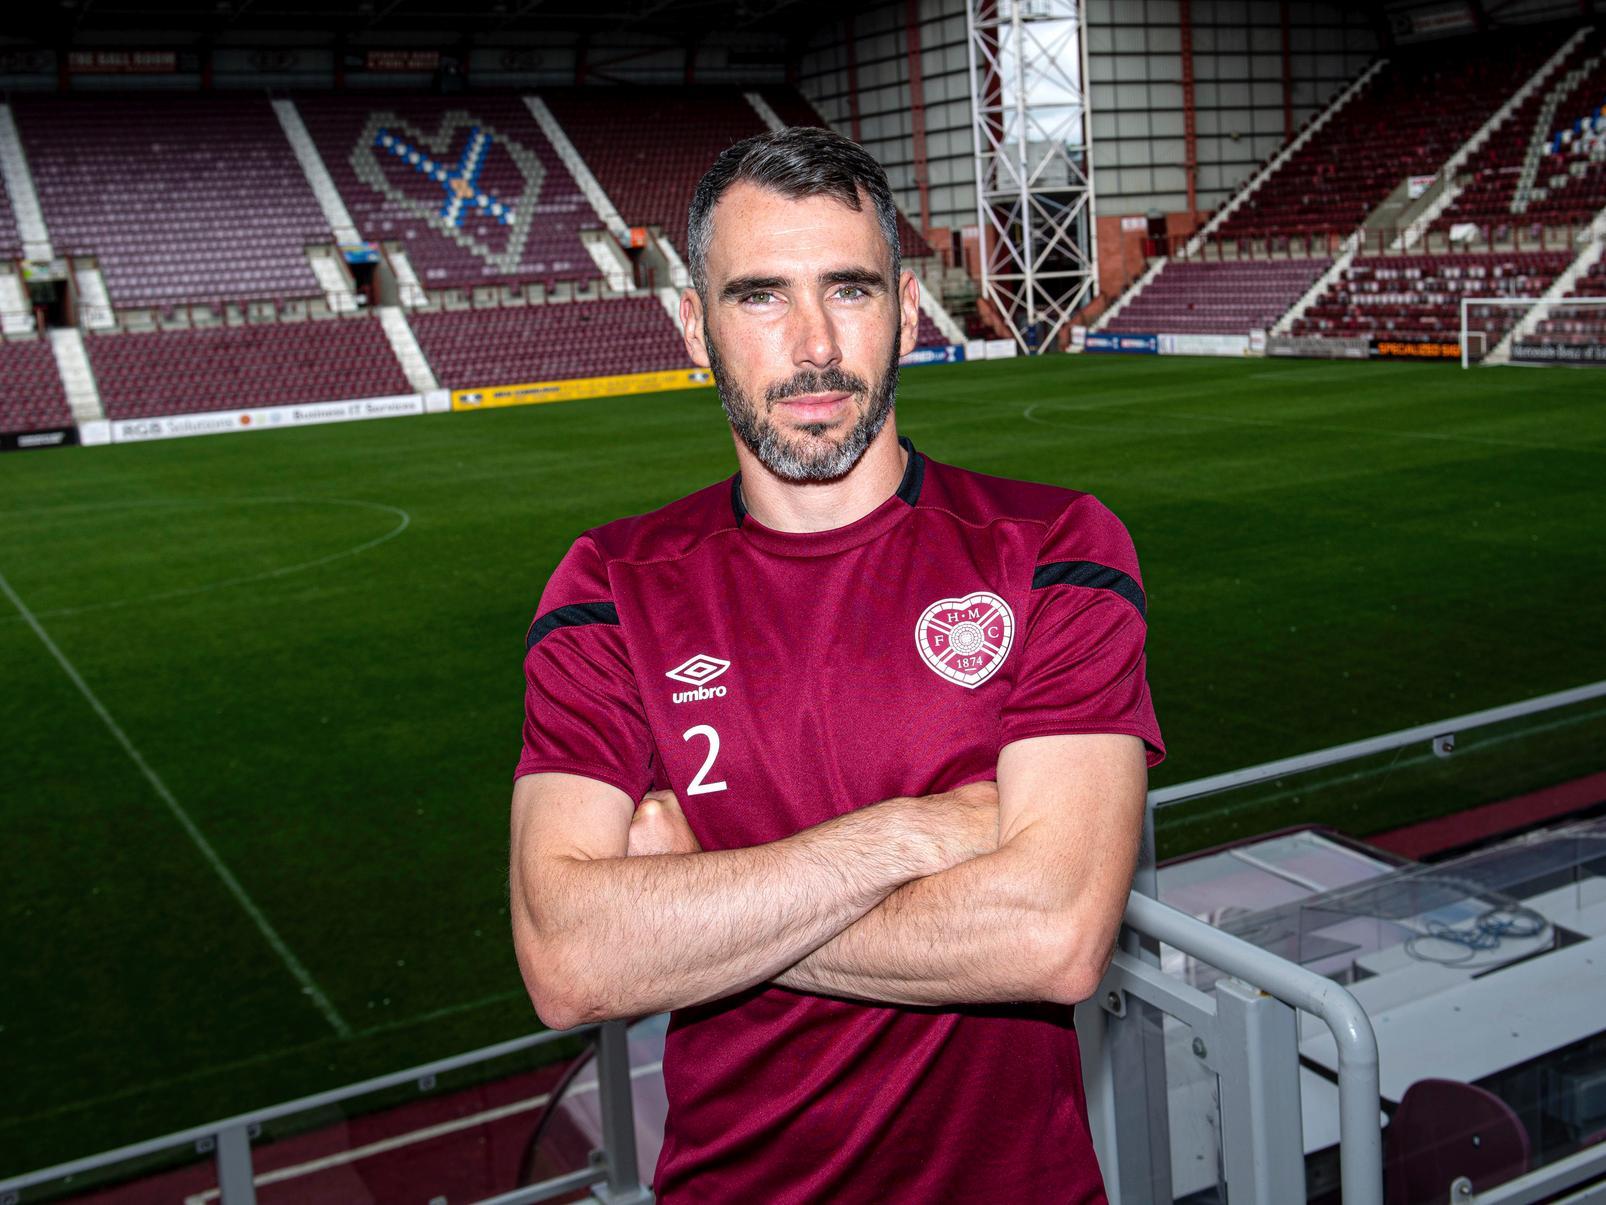 Defender was again Hearts best player by largely restricting the home side to shots from distance.